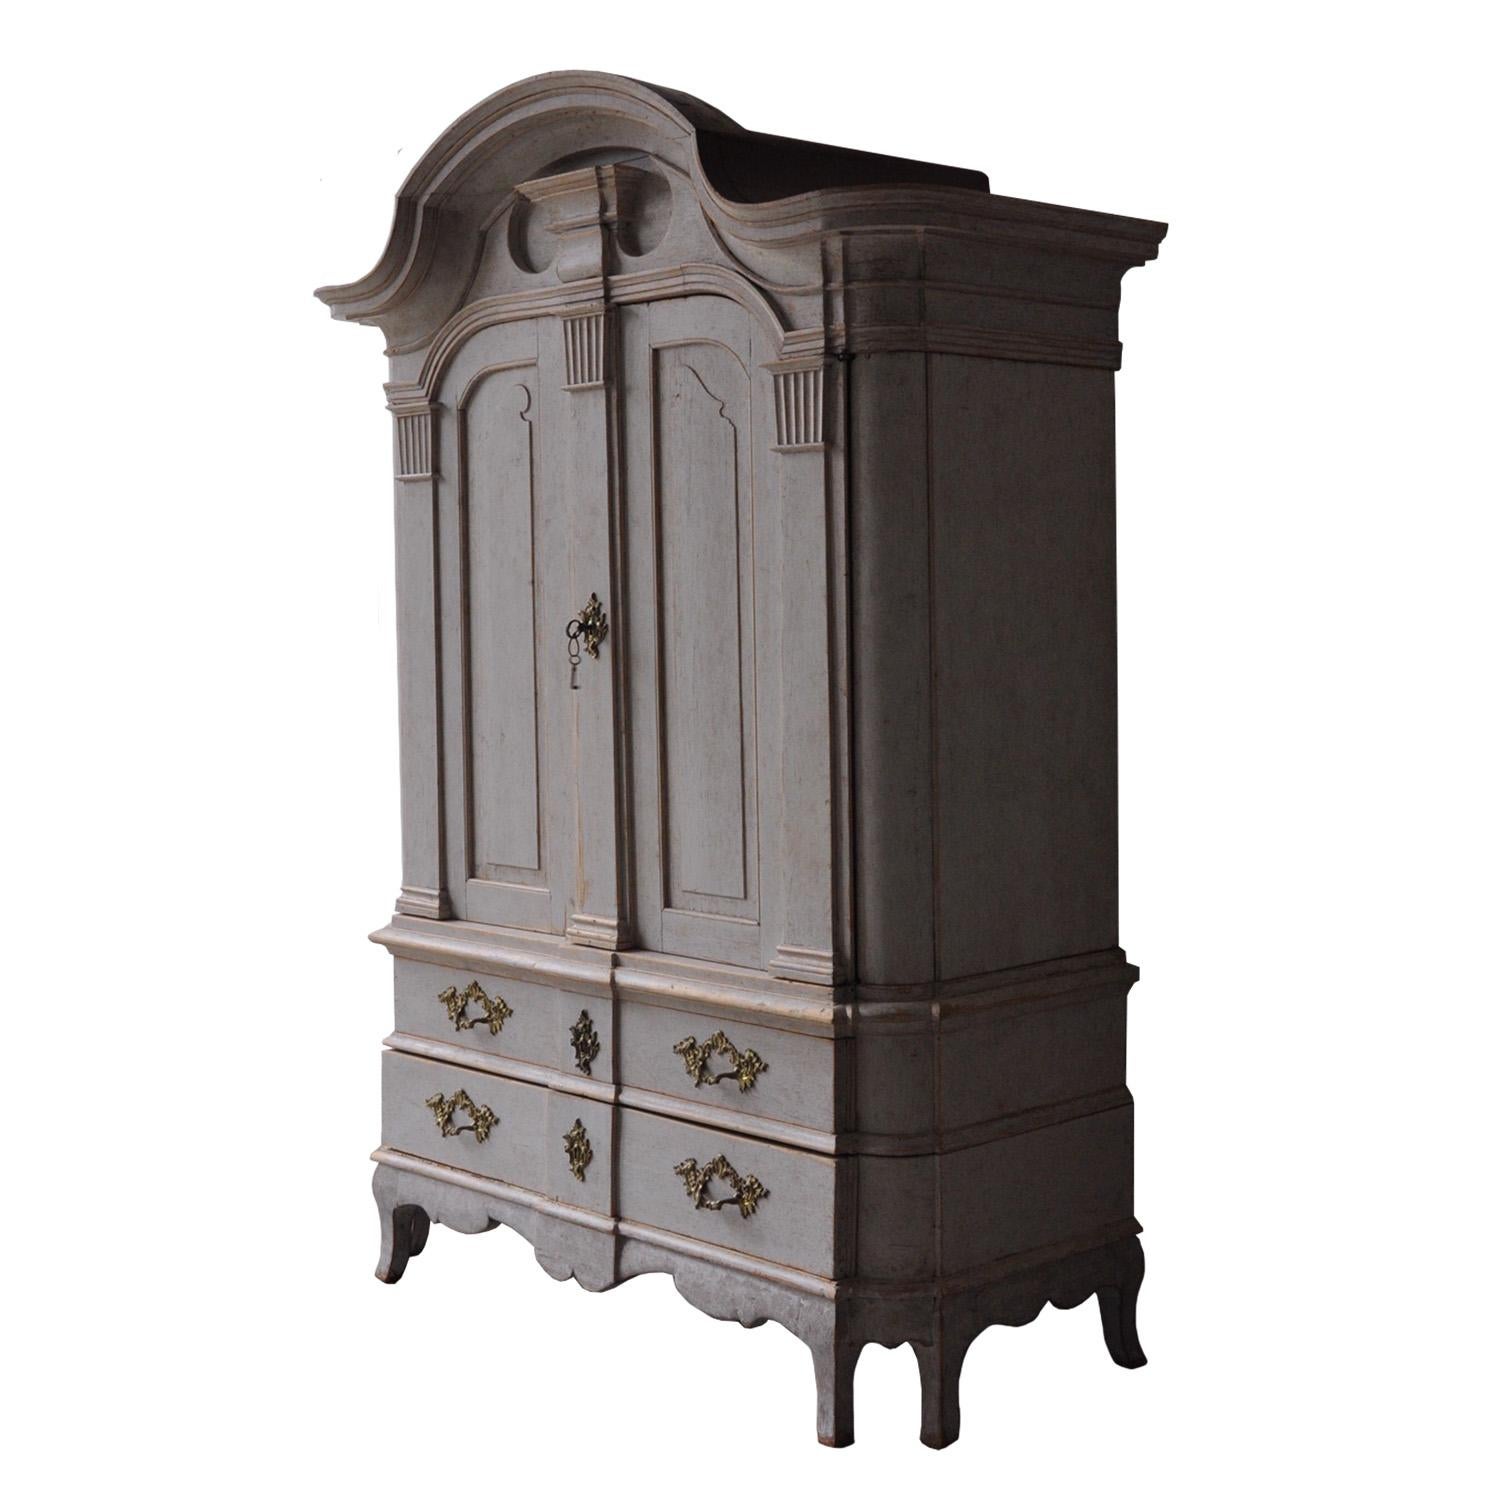 A stunning Rococo cabinet, simply one of the best cabinets we have sourced in sometime. This piece features a deep decorative carved pediment with a cartouche feature, a pair of carved double doors with Corinthian column sides opening to three